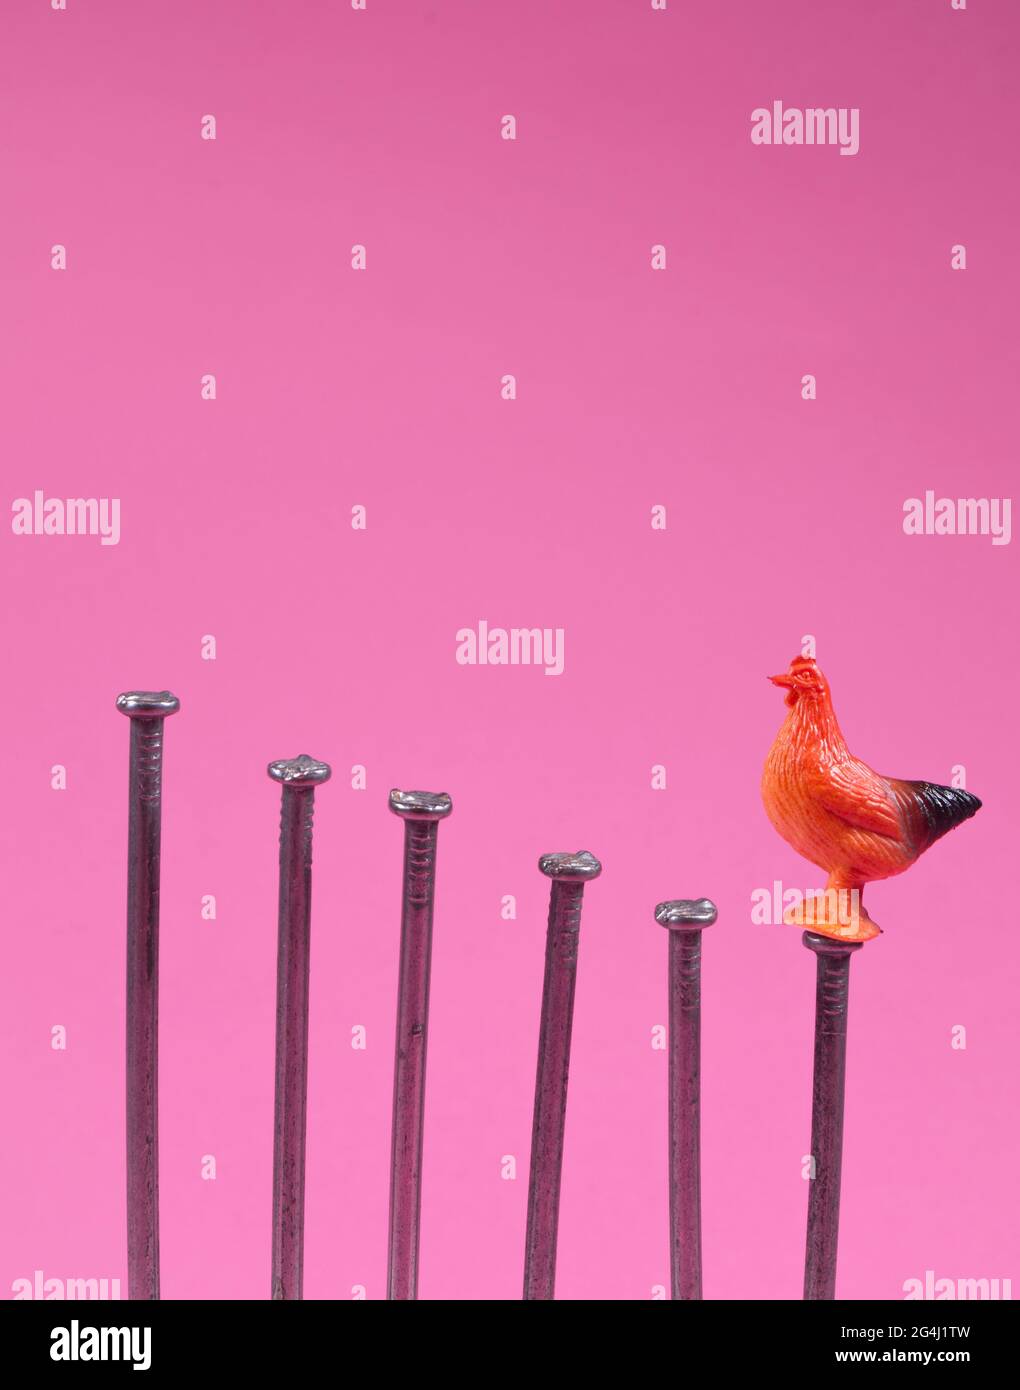 Kids toy rooster chicken climbing ladder to success. Stairway made of steel nails. Funny business idea. Minimal abstract success concept. Copy space. Stock Photo